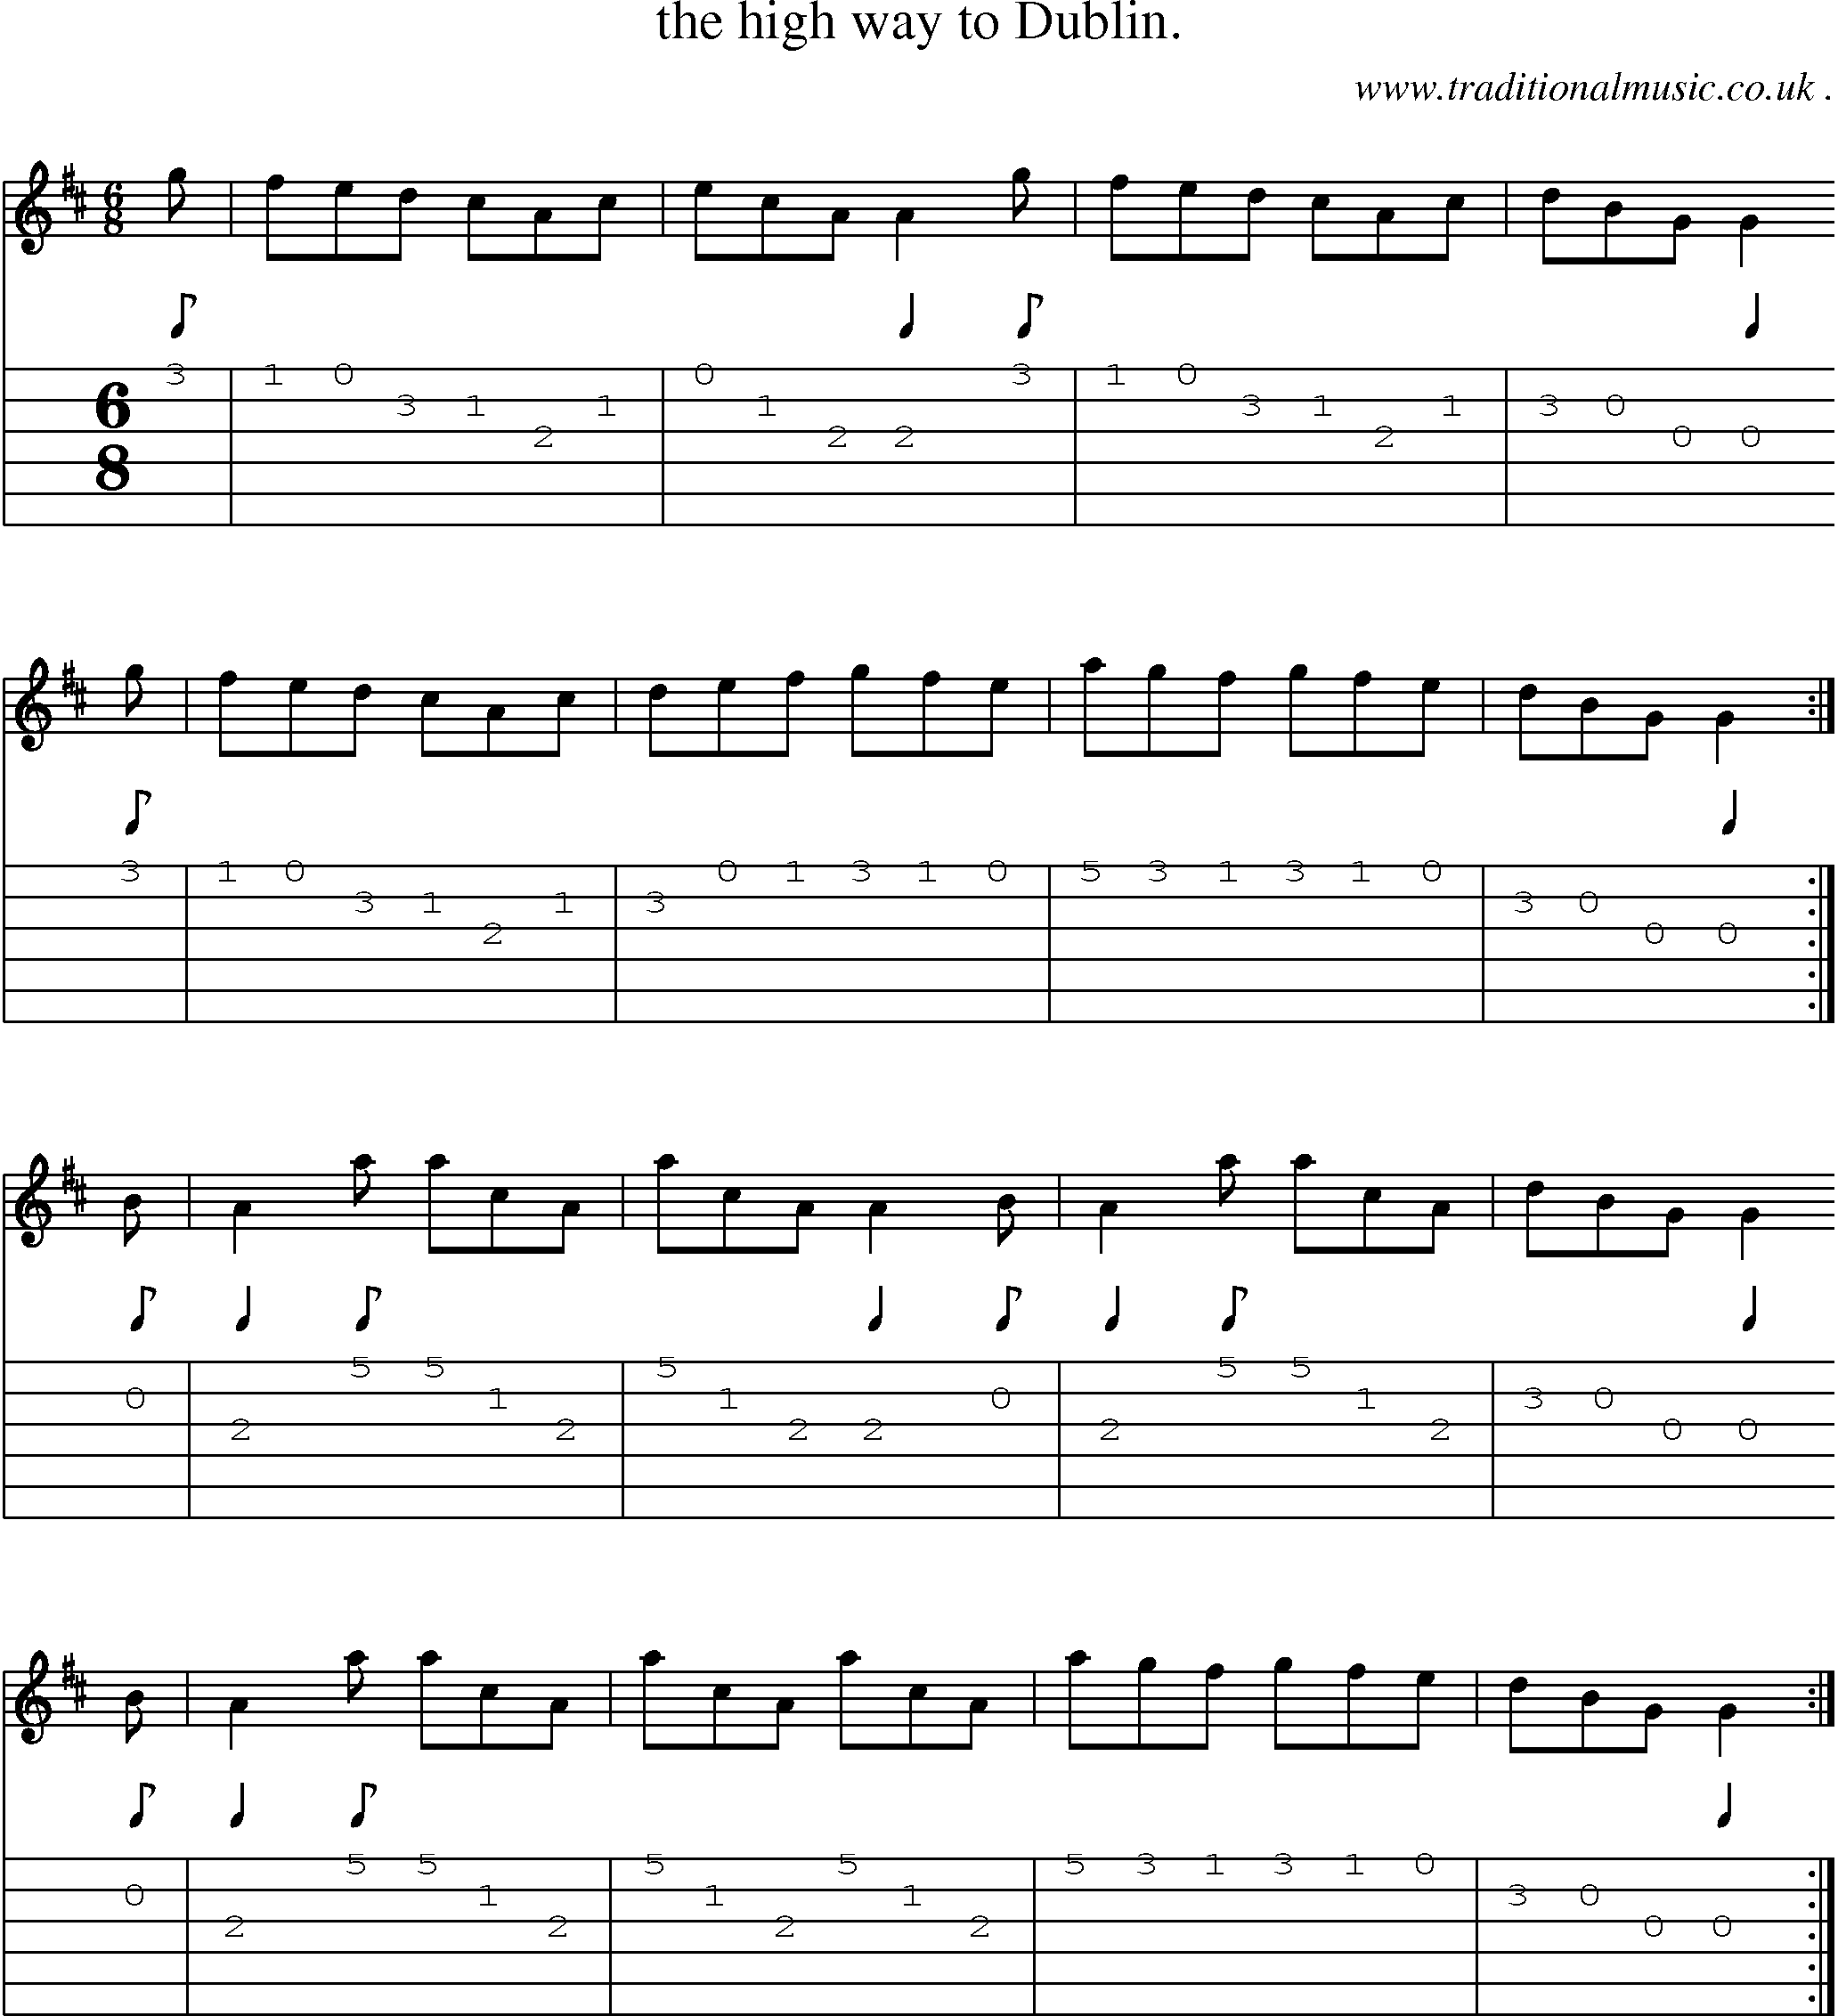 Sheet-Music and Guitar Tabs for The High Way To Dublin